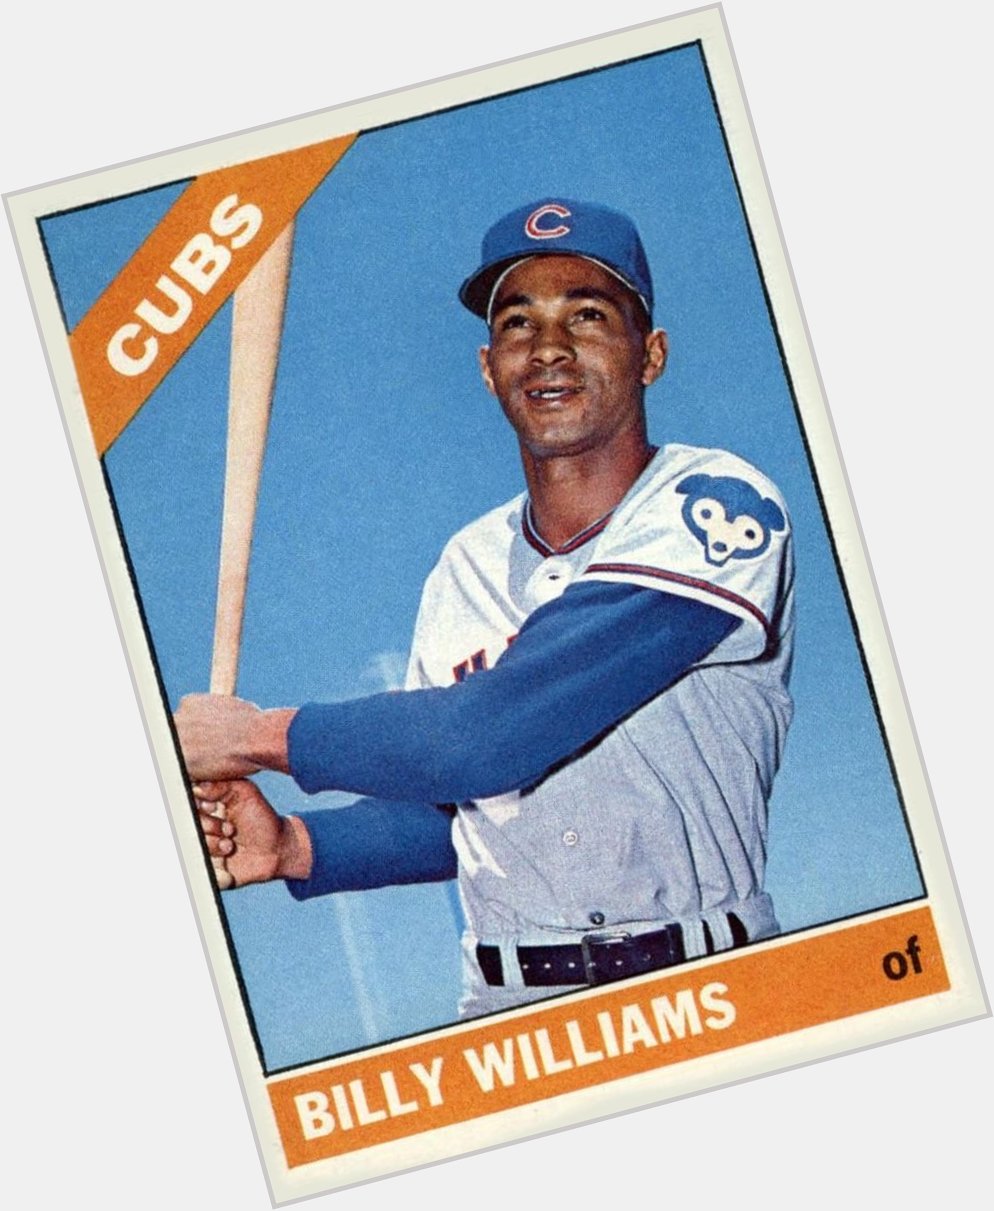    Happy Birthday!   Billy Williams was a great ball player! 